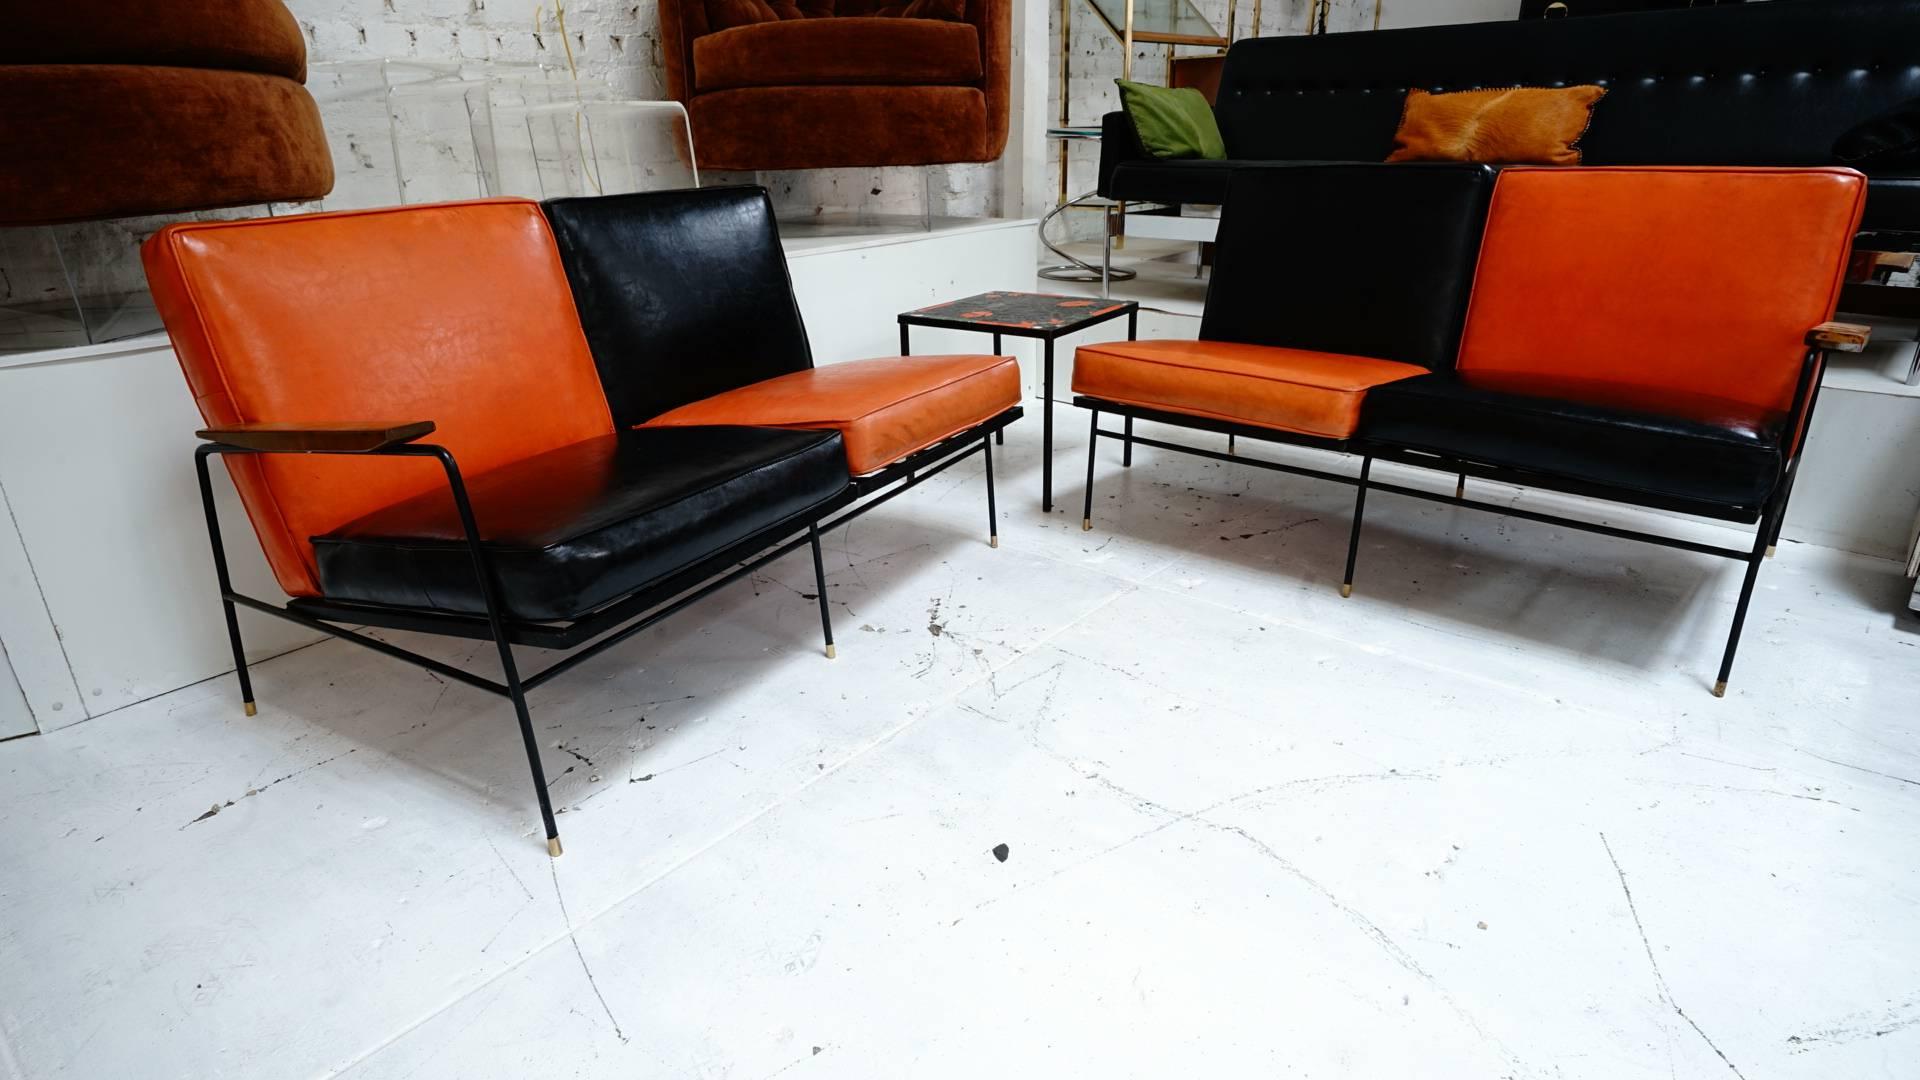 All original with the original Naugahyde cushions. 

A sectional or one long outdoor or indoor sofa.
  